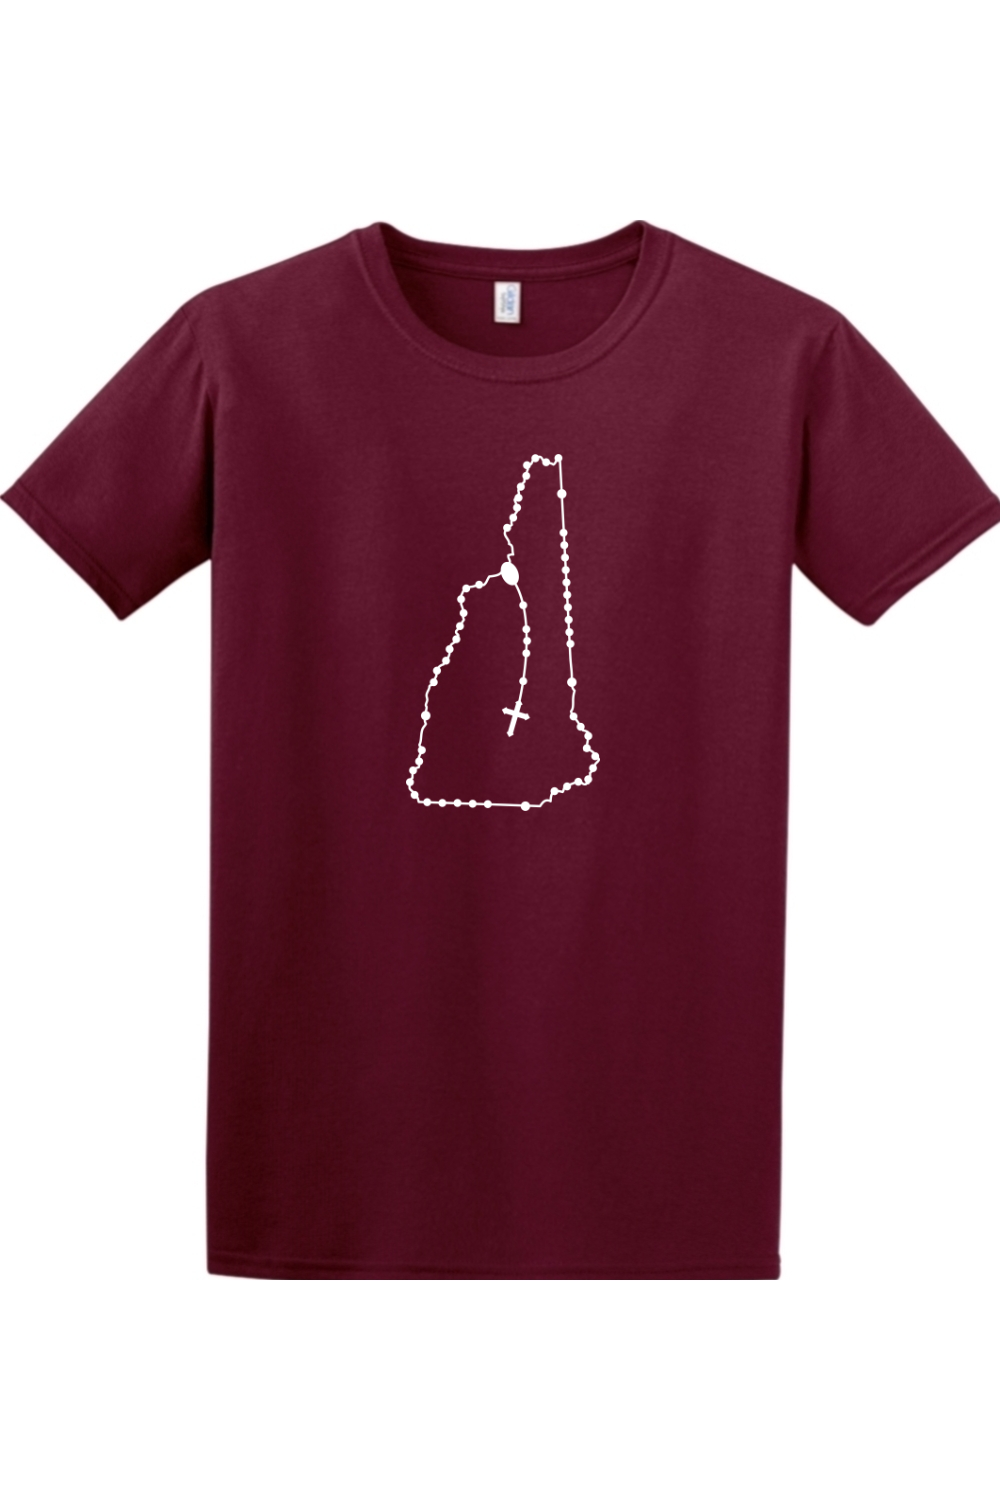 New Hampshire Rosary Adult T-shirt